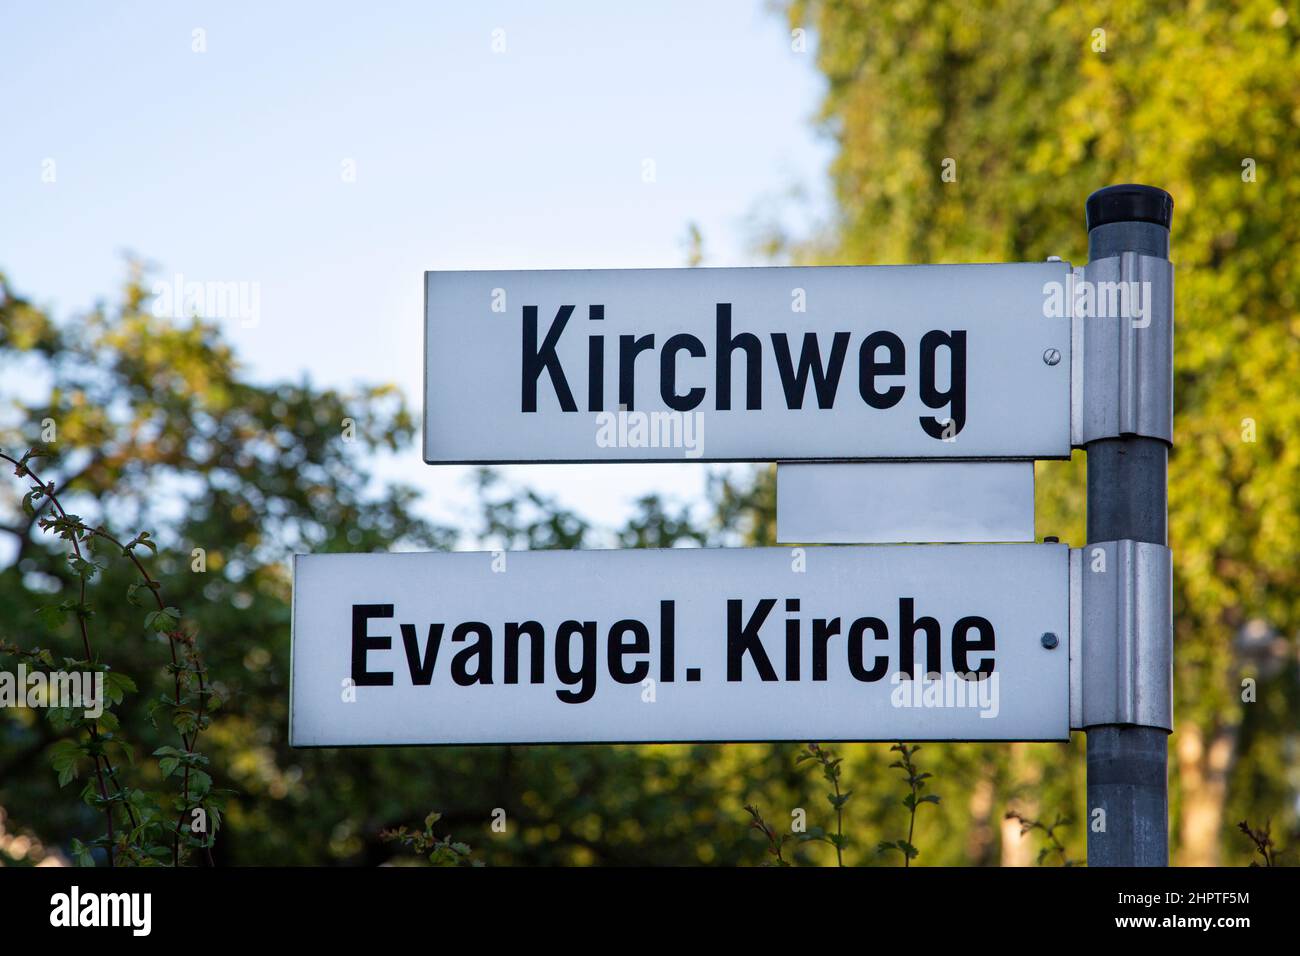 Street sign with the German text 'Kirchweg' and 'Evangel. Kirche' which tanslates into 'Churchway' and 'Protestant Church' in English language Stock Photo